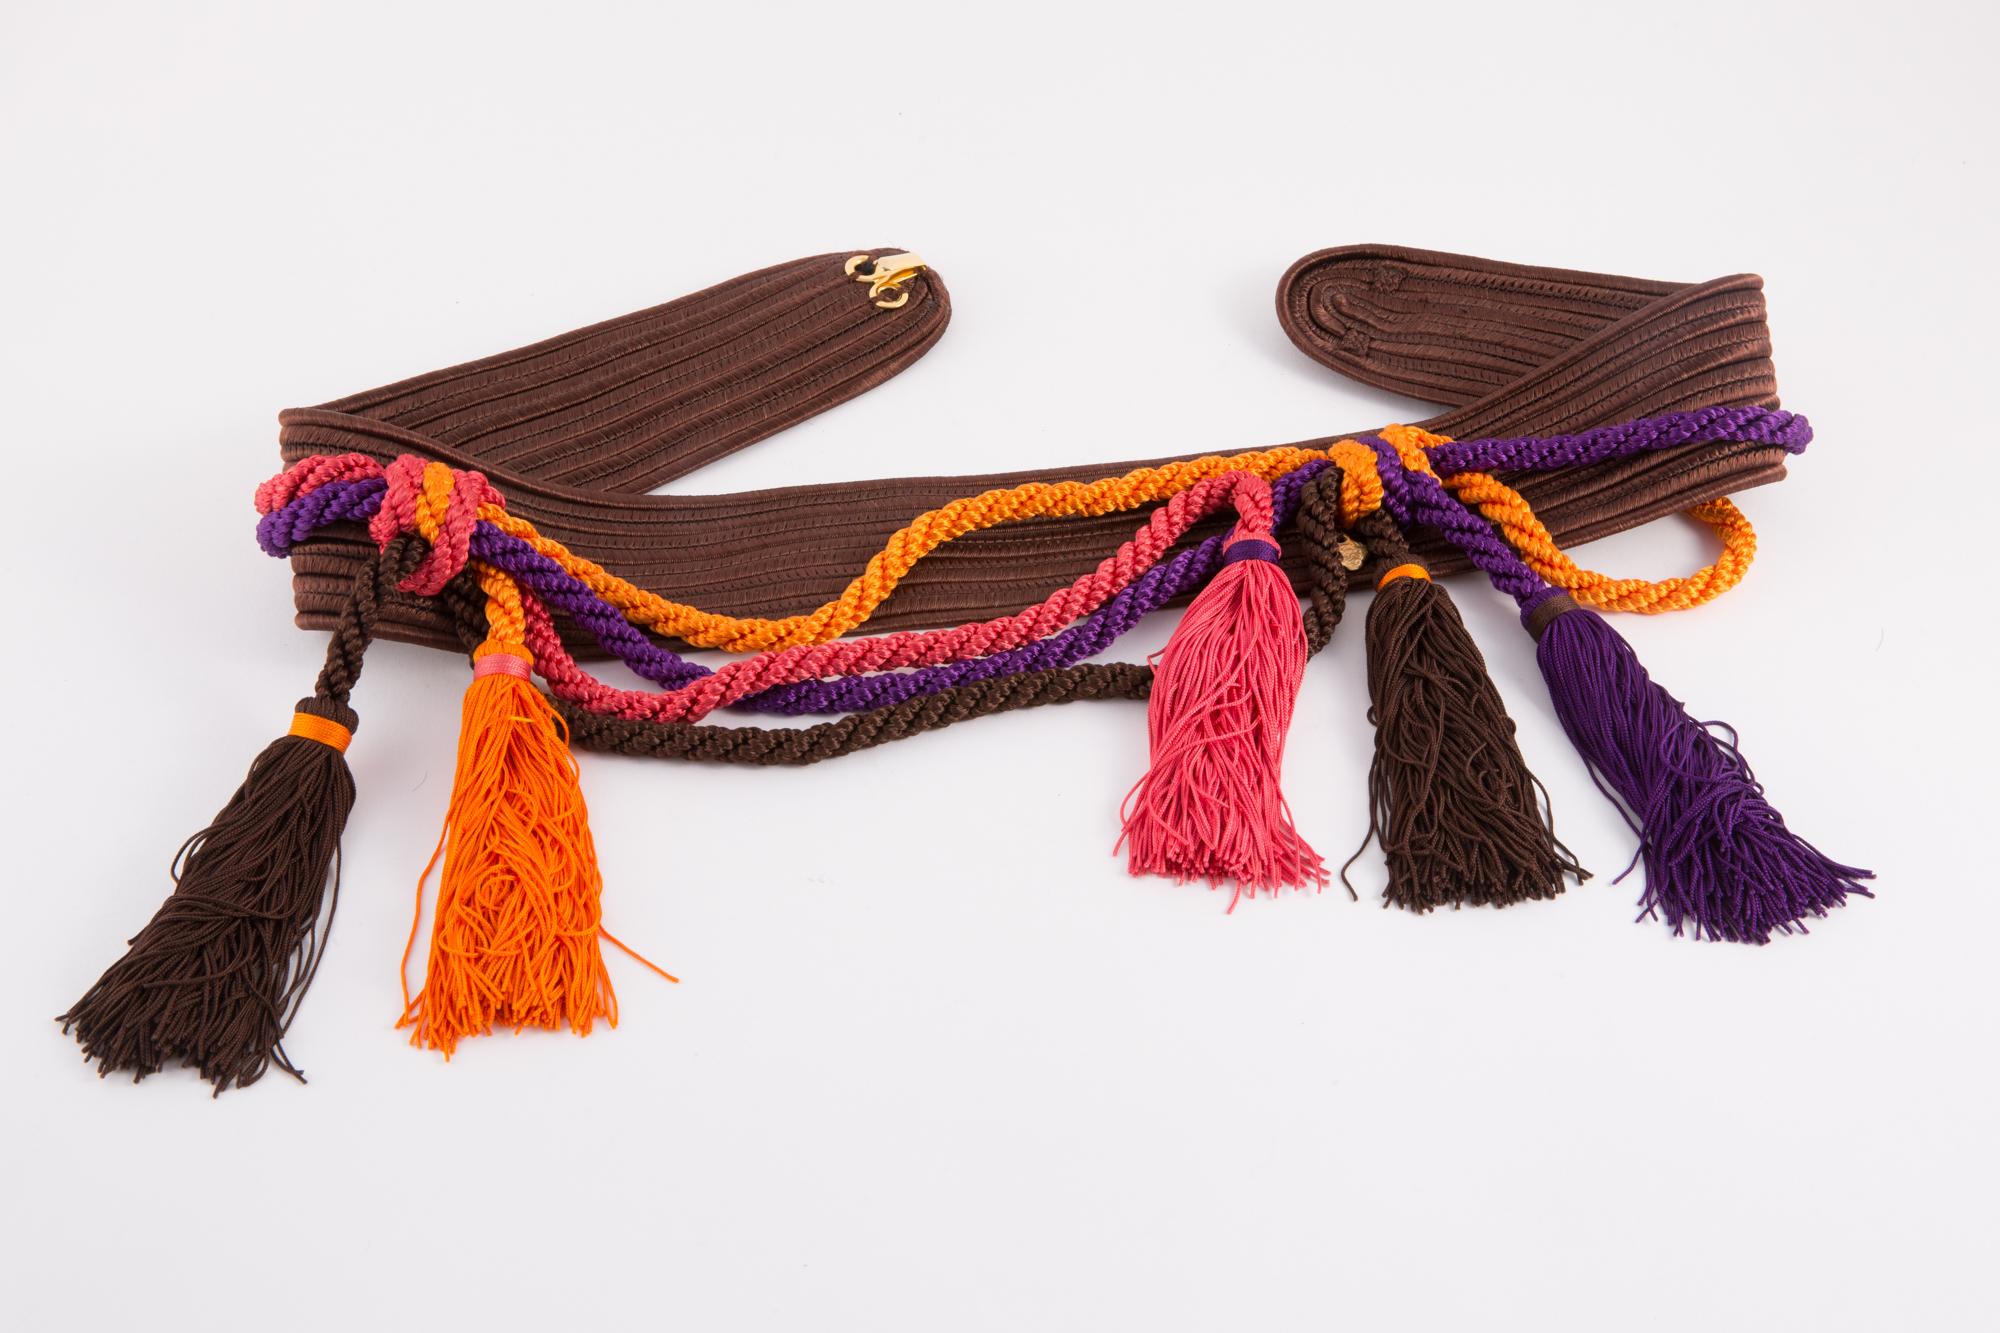 Multicolour Yves Saint Laurent braided belt featuring brown braided belt, and purple & orange fringed pompons, logo gold tone metallic plaque. See catwalk 1991s photo.
In excellent vintage condition. Made in France. 
Maxi Length 31.4in. (80cm)
Width